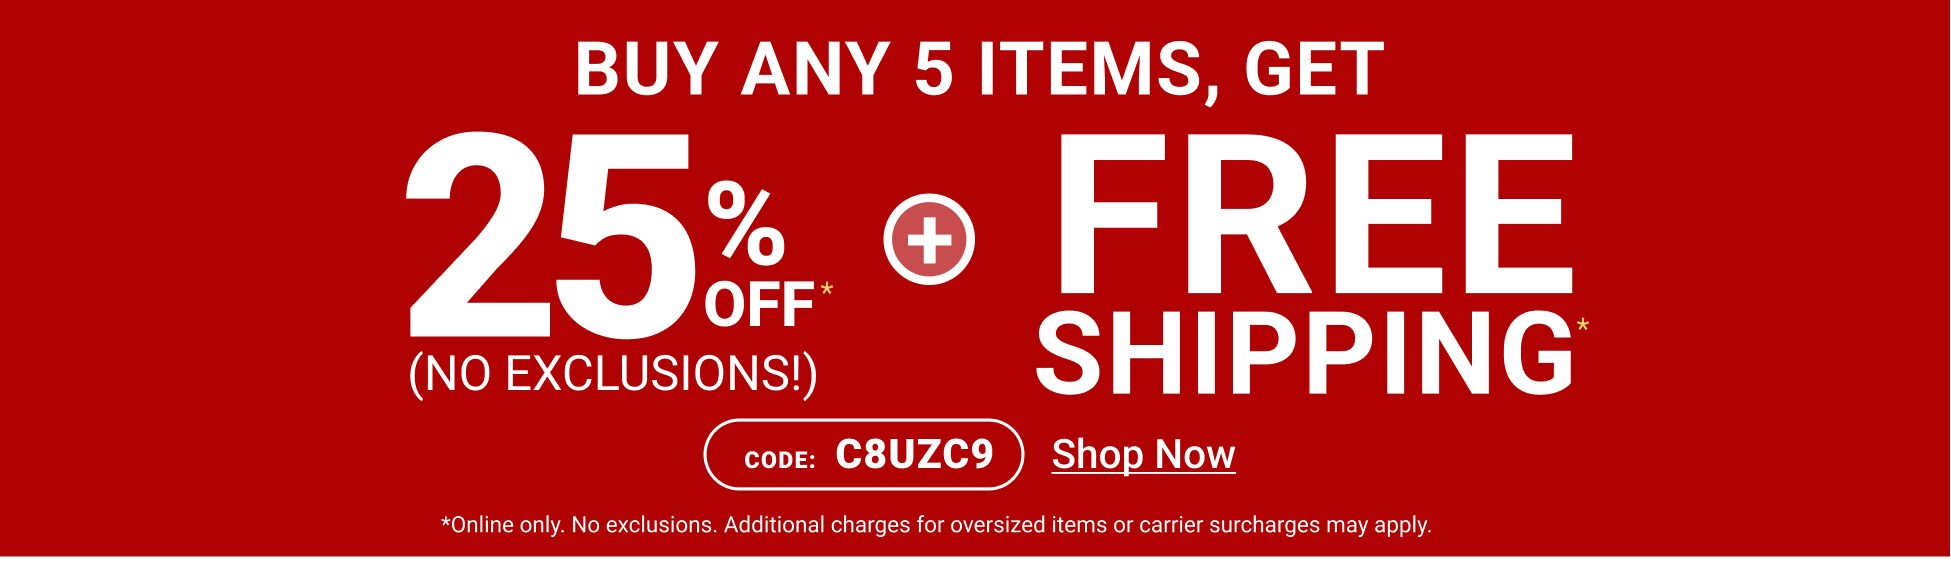 Buy Any 5 Items, Get 25% Off (No Exclusions!) plus Free Shipping. Shop Now